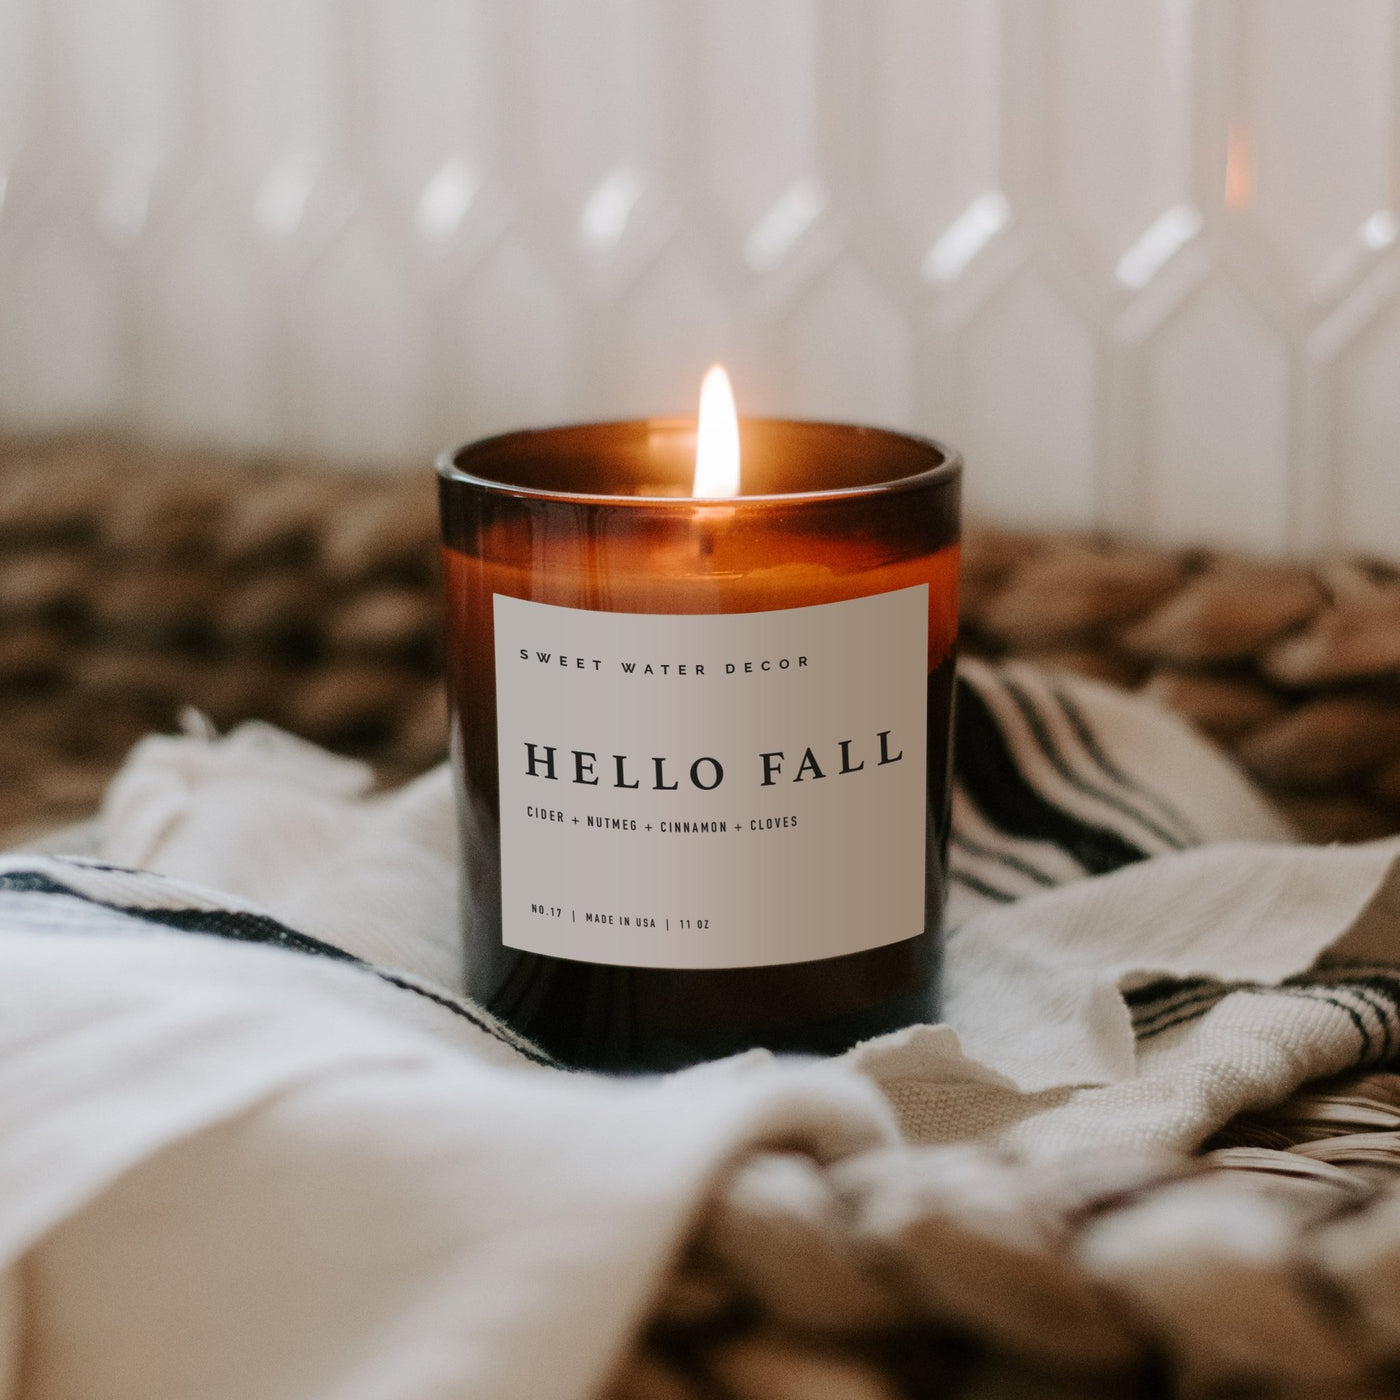 Hello Fall Soy Candle - Amber Jar - 11 oz - Sweet Water Decor - Candles